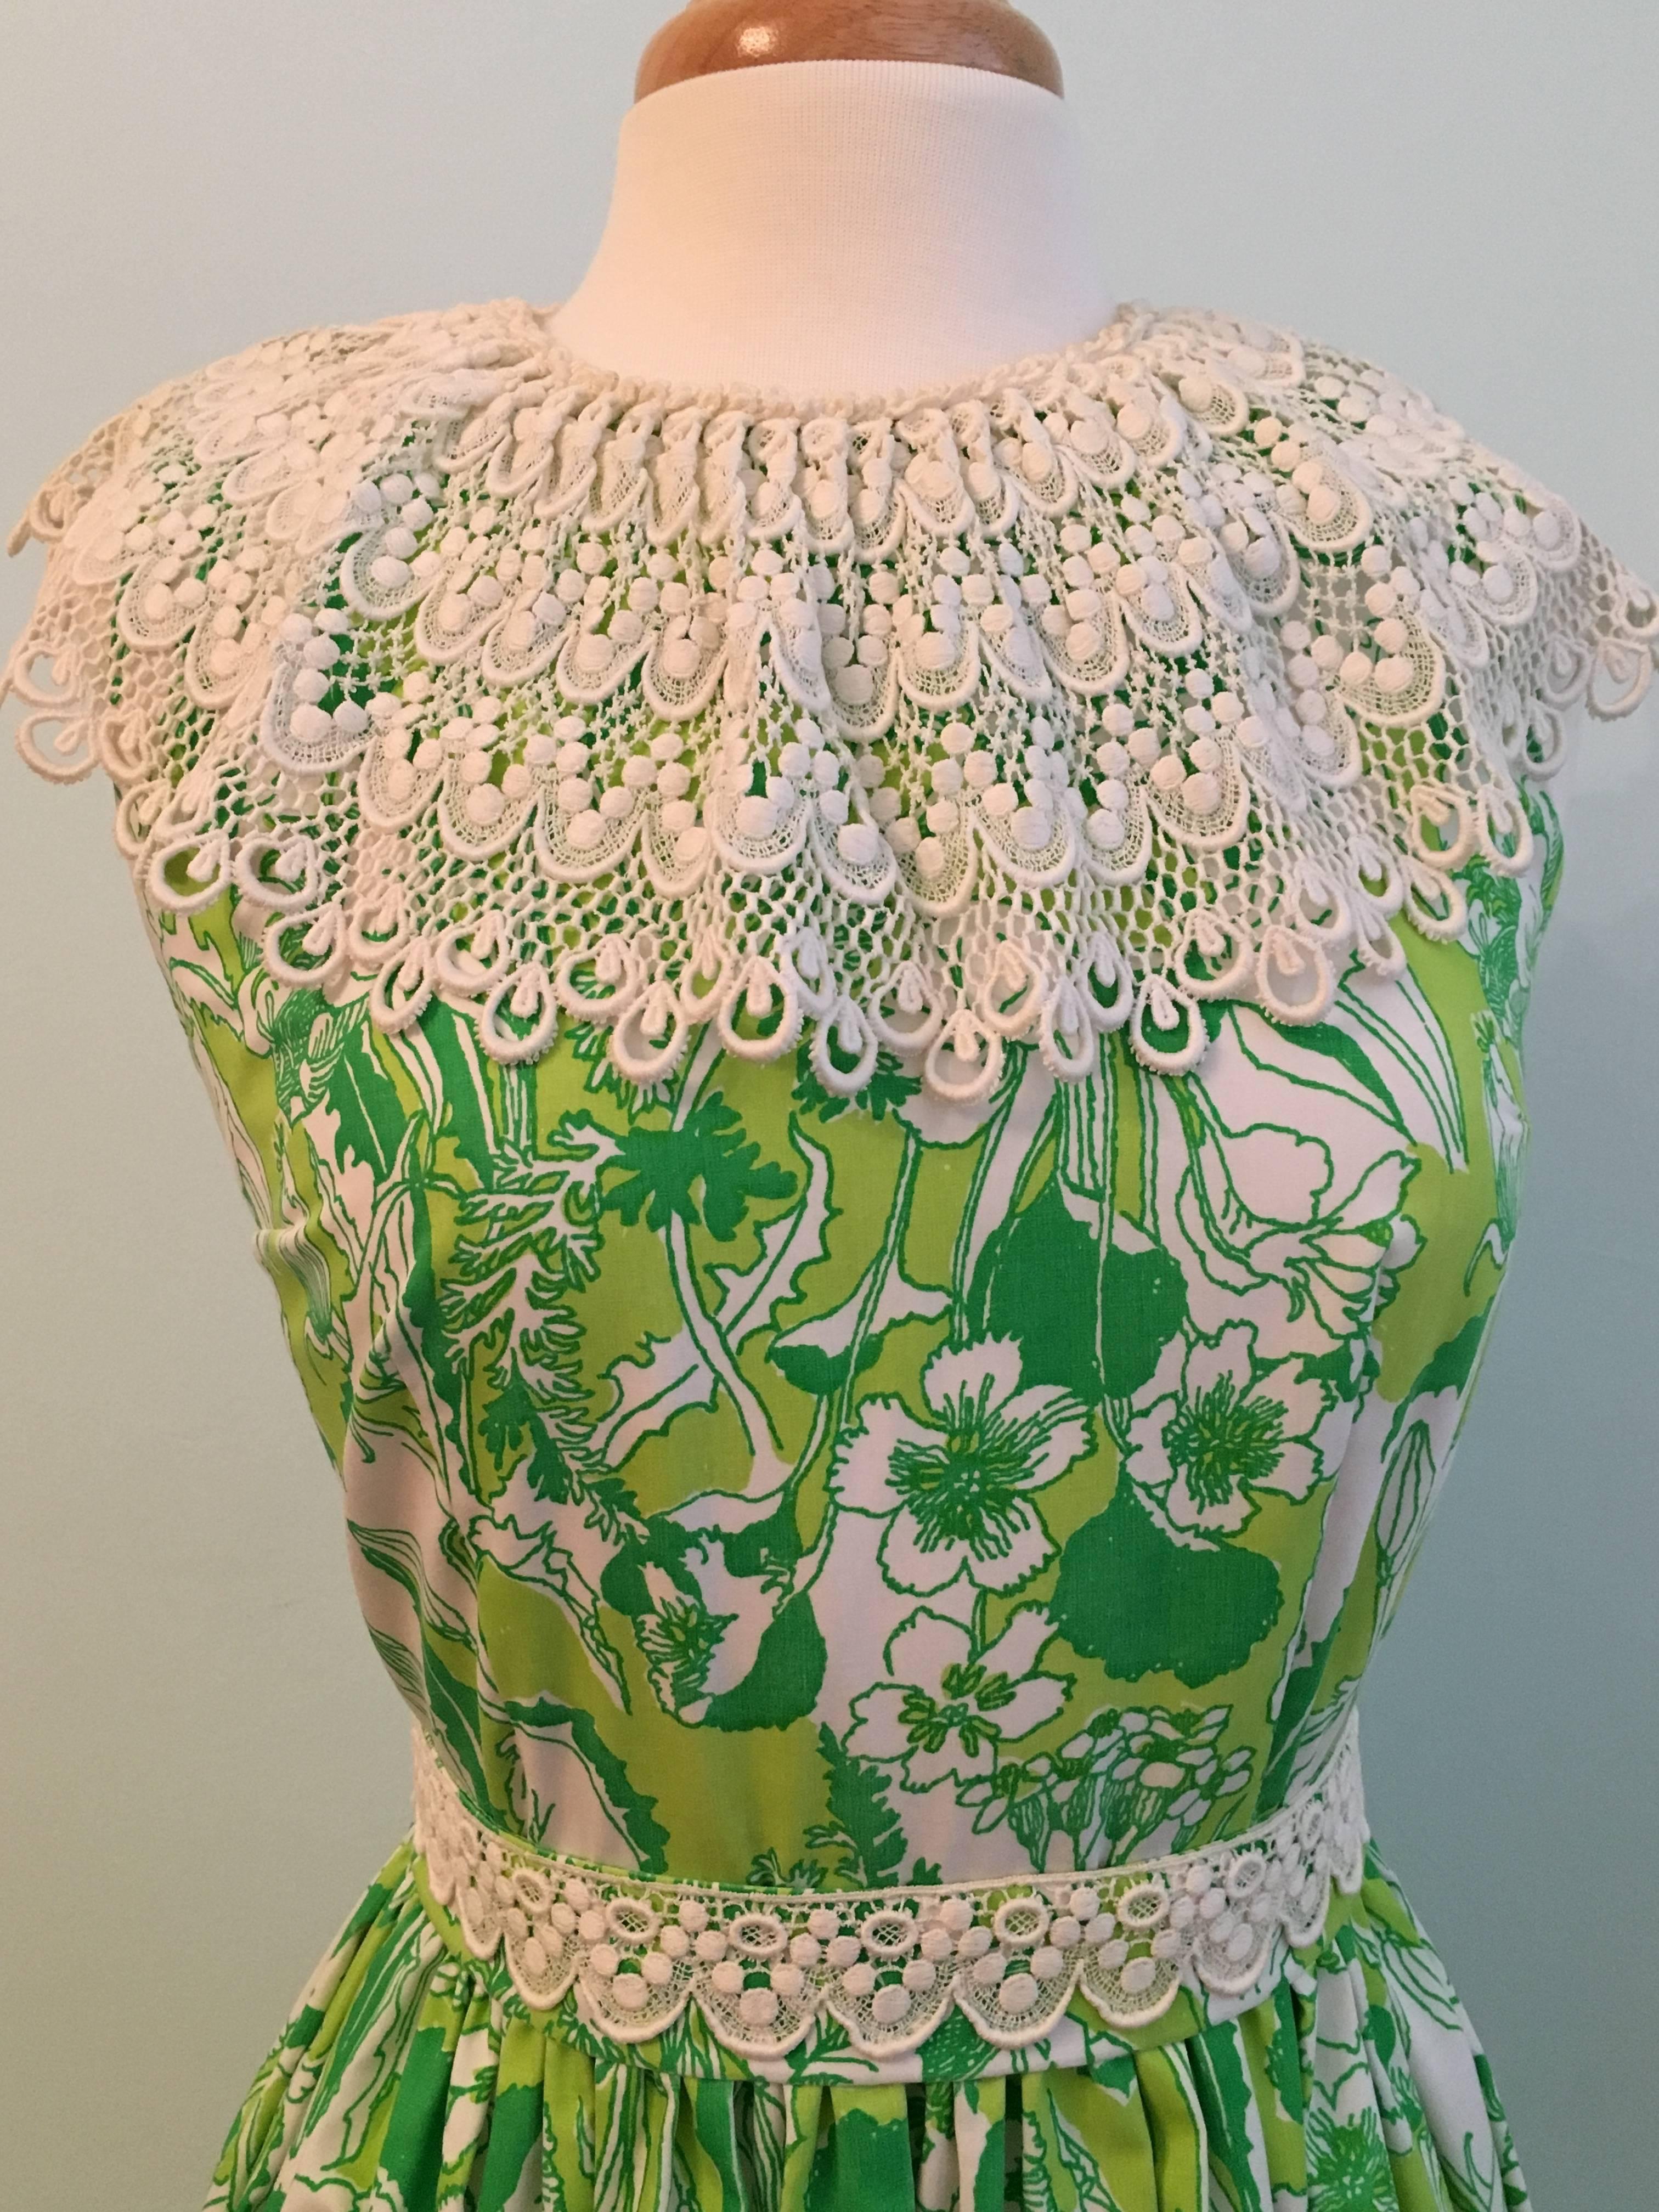 Brown Rare 1960s Lilly Pulitzer Dress Green Floral Print with Huge Lace Collar For Sale